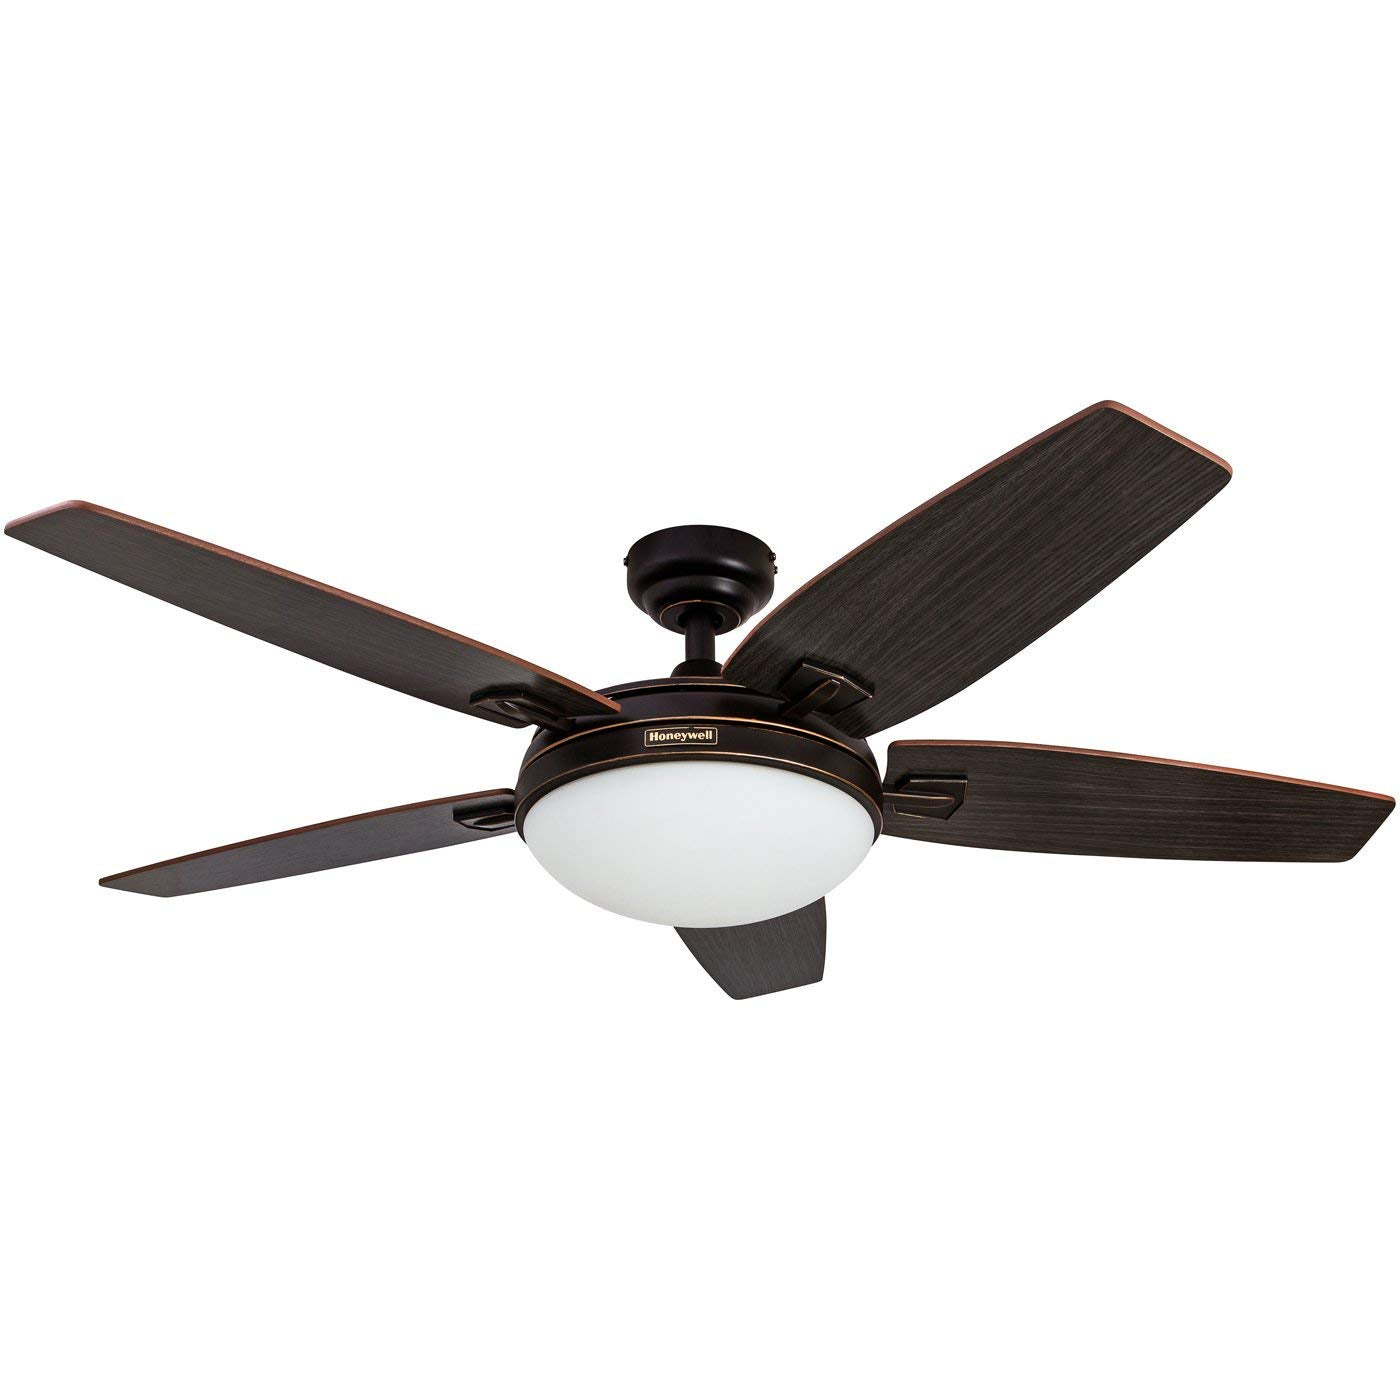 Honeywell Ceiling Fans Carmel, 48 Inch Contemporary Indoor LED Ceiling Fan with Light